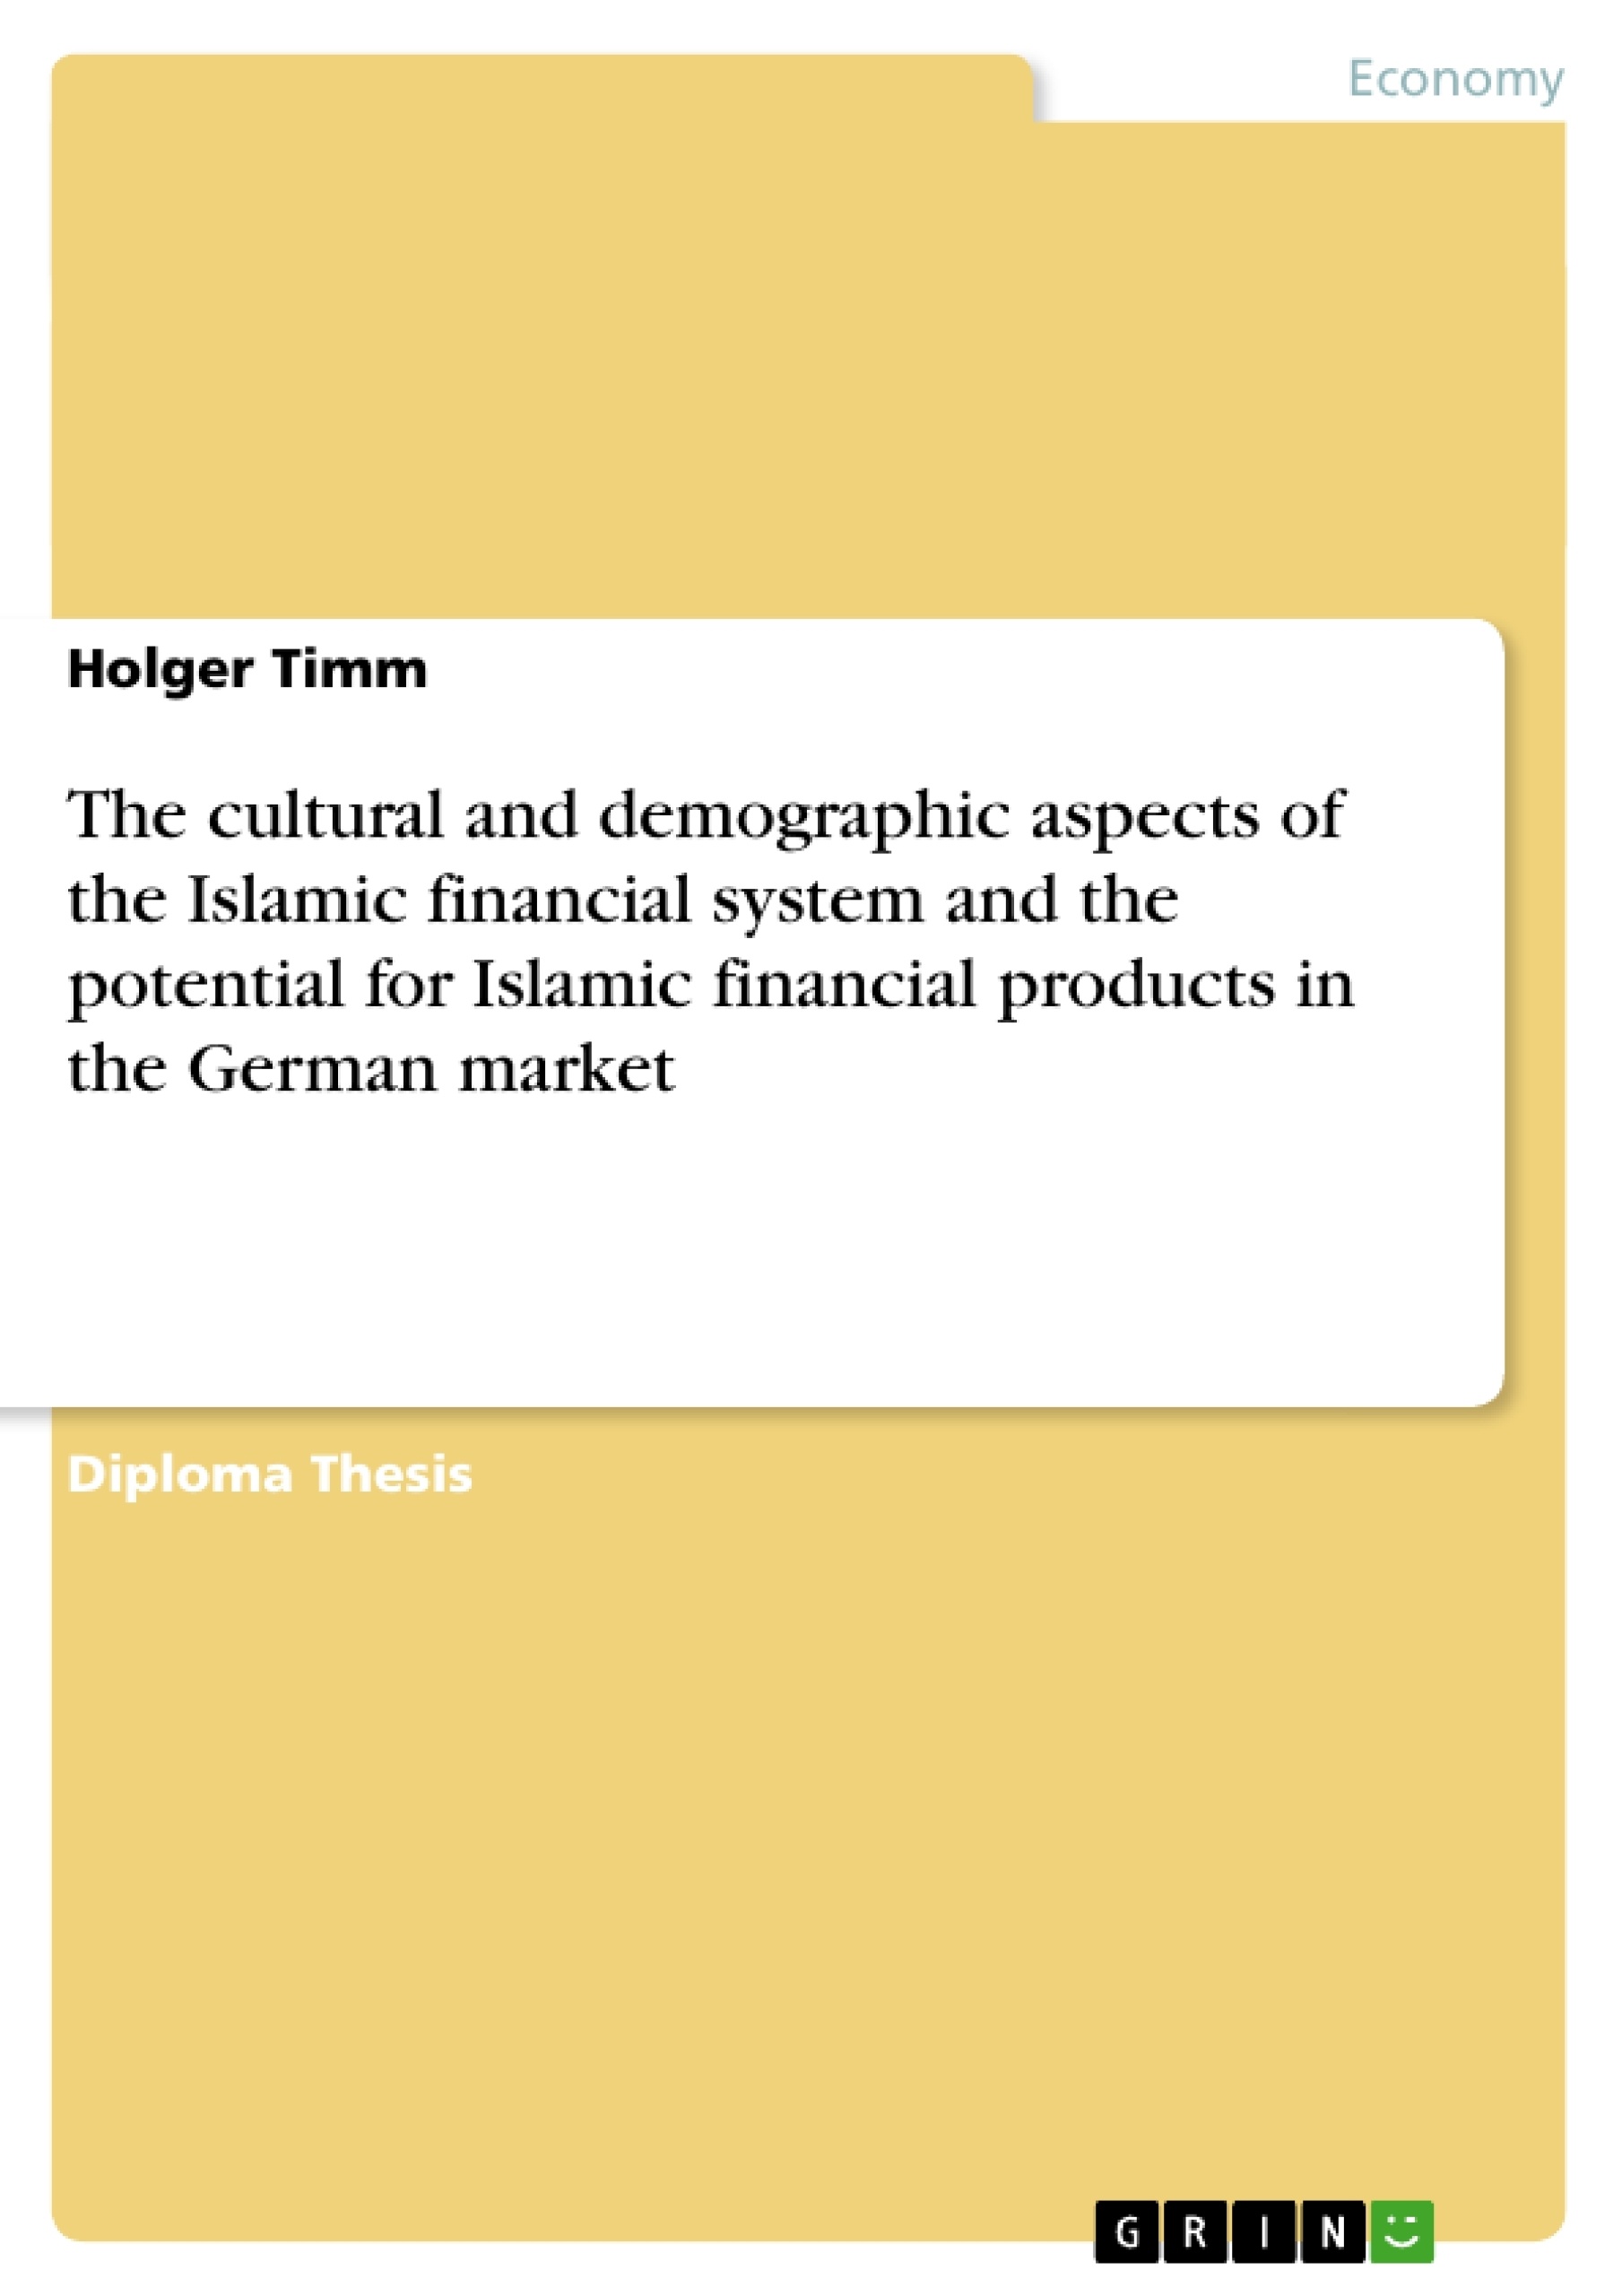 Title: The cultural and demographic aspects of the Islamic financial system and the potential for Islamic financial products in the German market